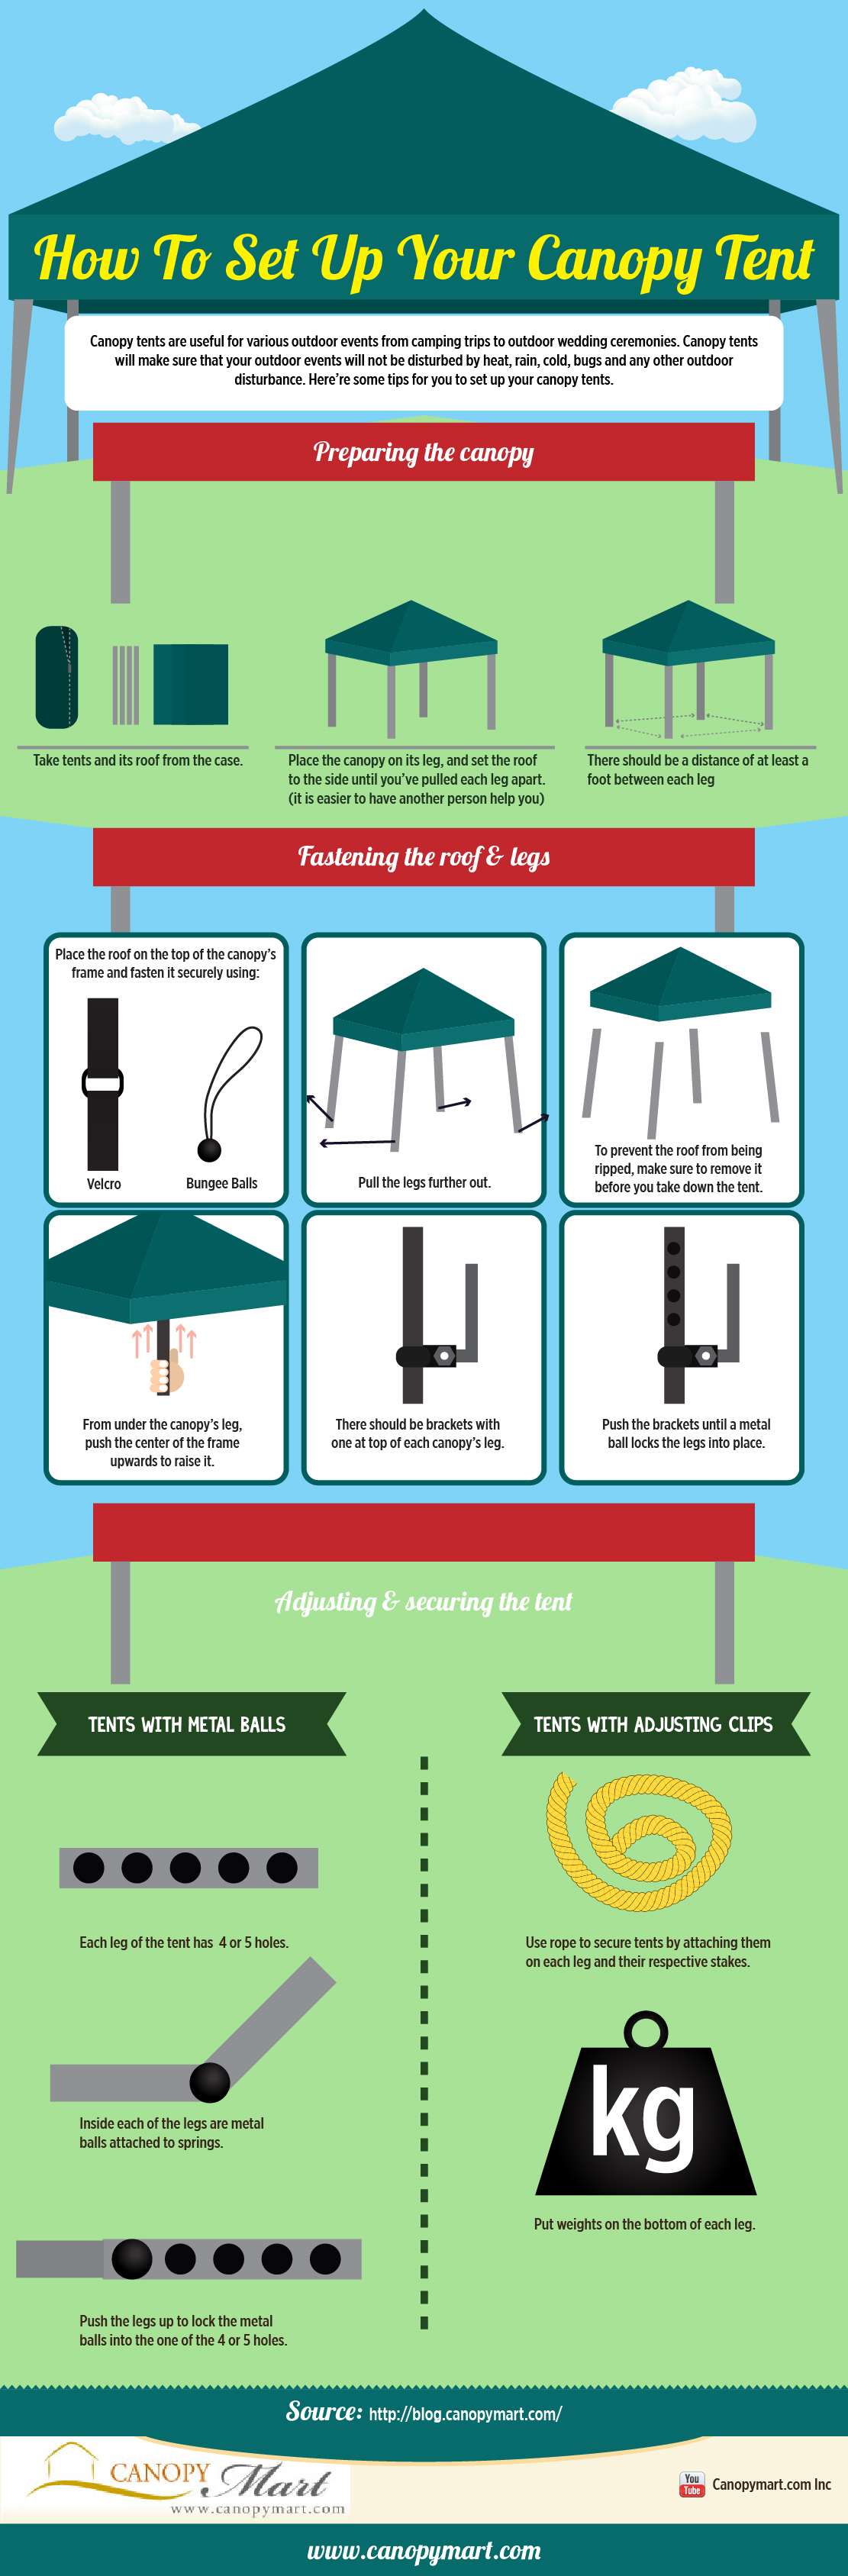 How to Set Up Your Canopy Tent